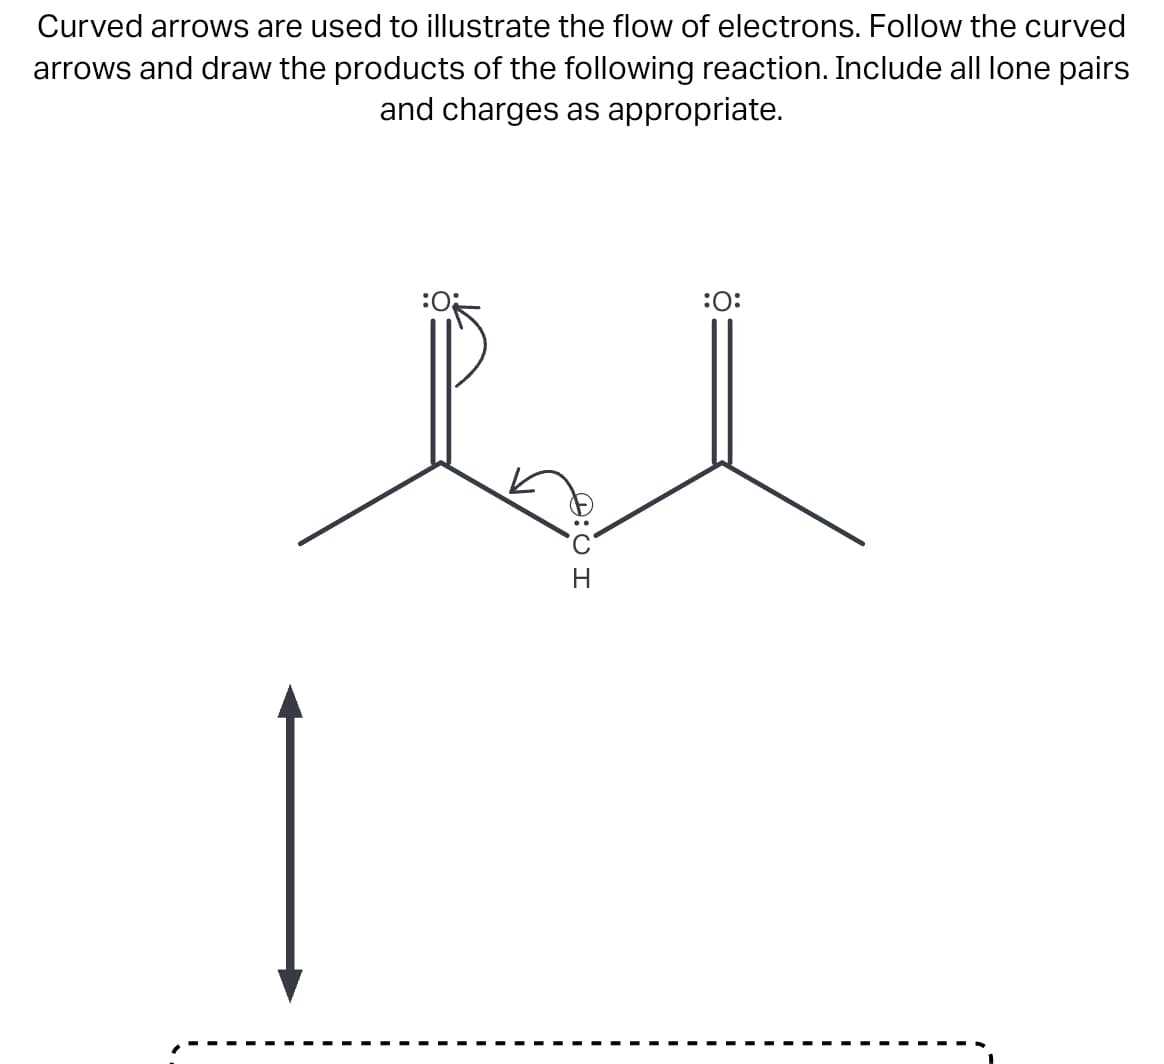 Curved arrows are used to illustrate the flow of electrons. Follow the curved
arrows and draw the products of the following reaction. Include all lone pairs
and charges as appropriate.
:0
:O: